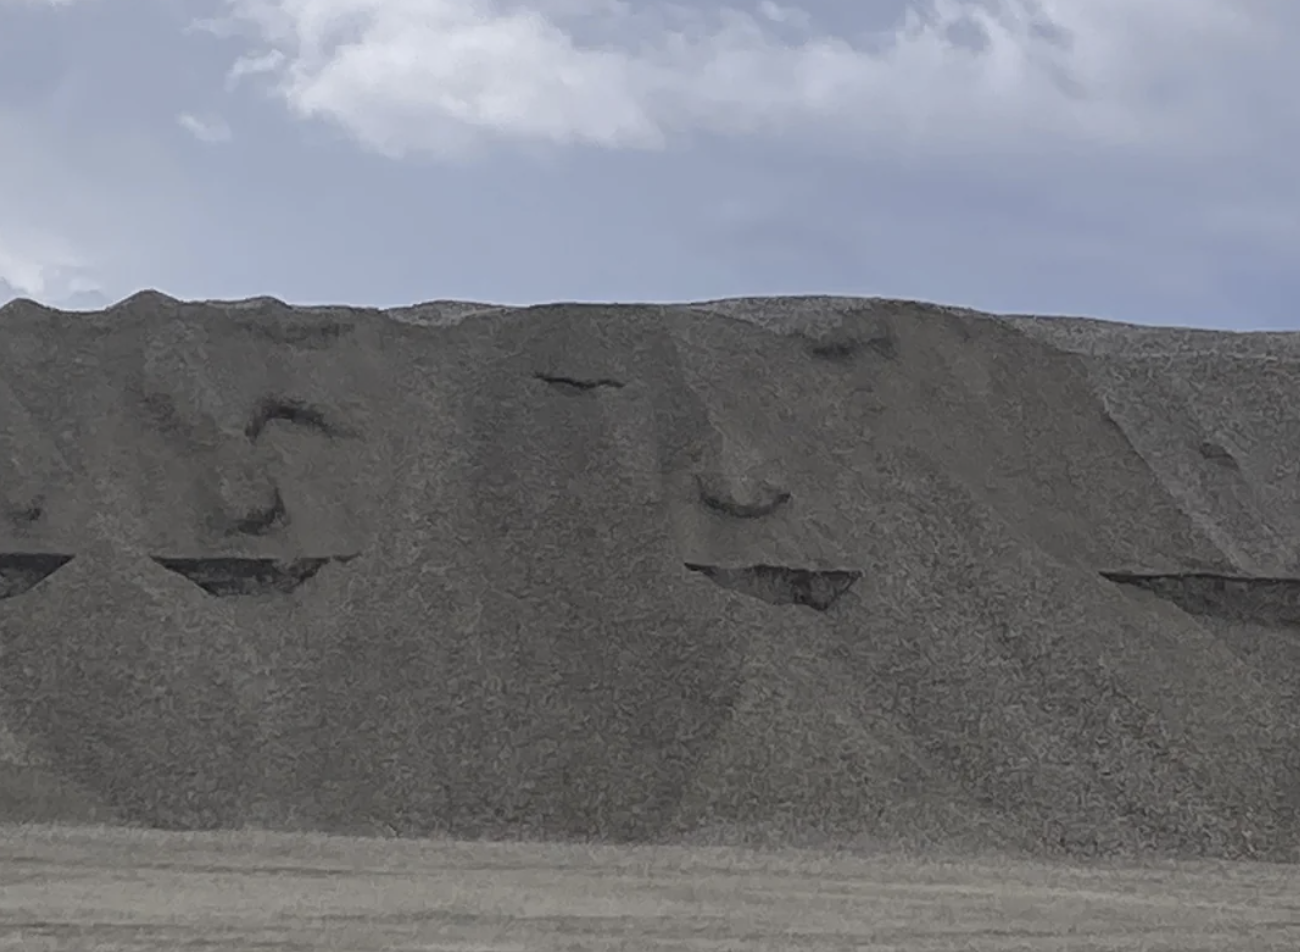 Large pile of gravel with indentations forming a smiley face under a cloudy sky